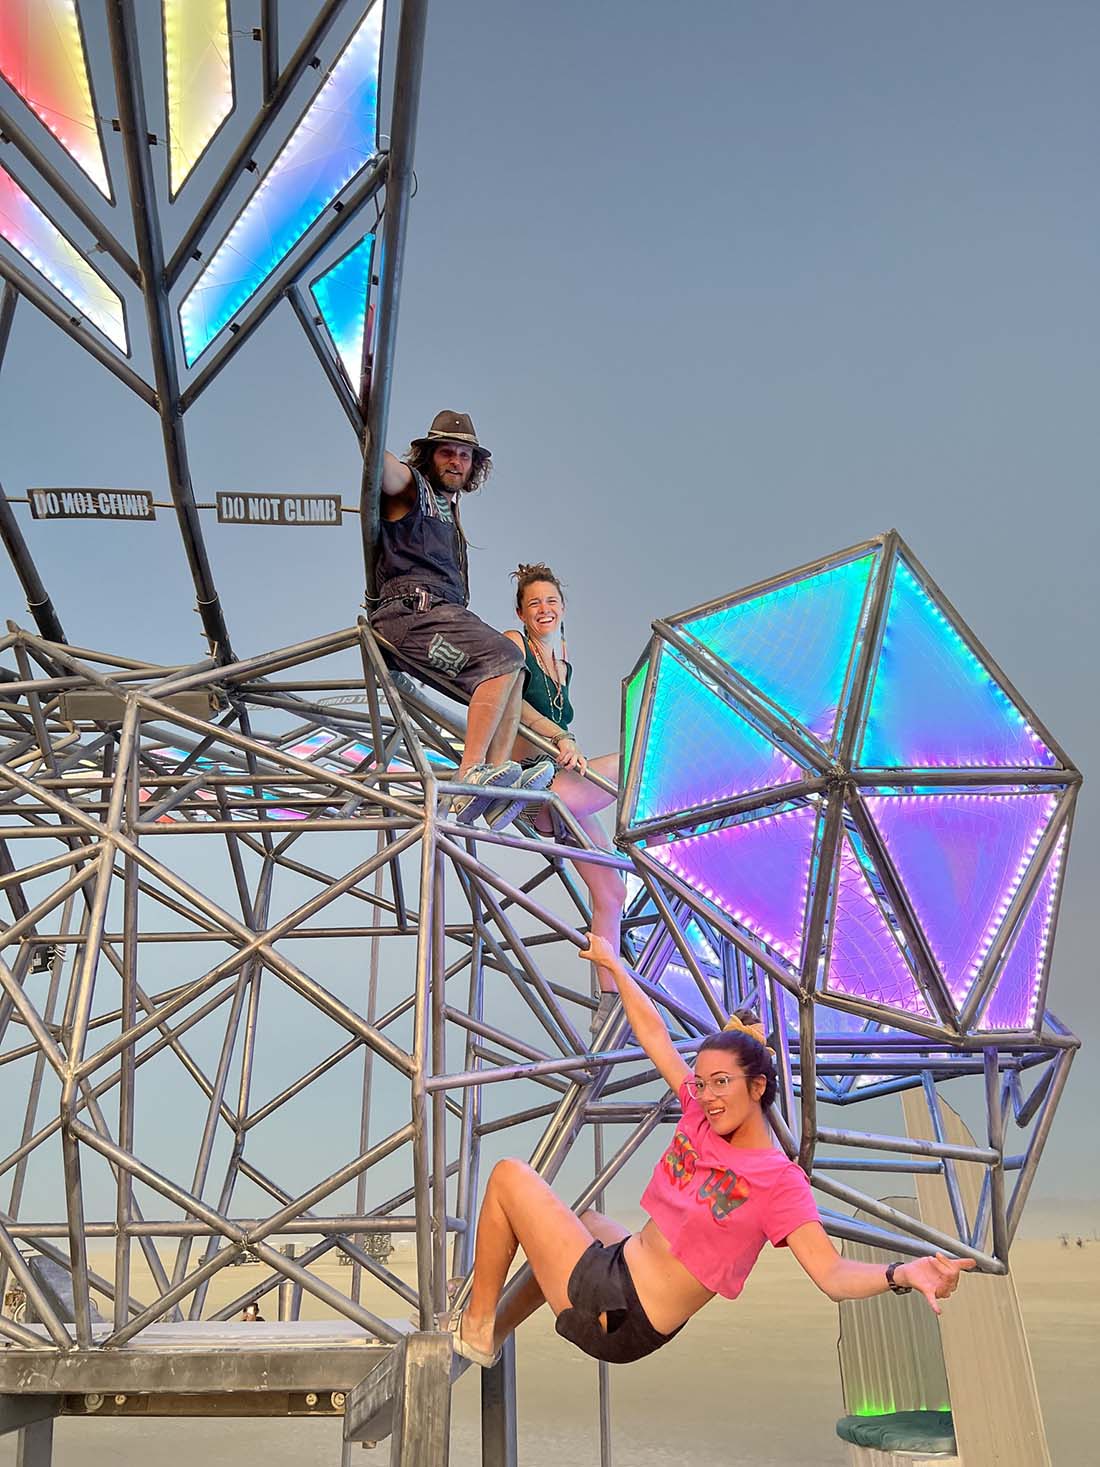 Lighting crew at Burning Man festival creating an installation with LED pixel strips